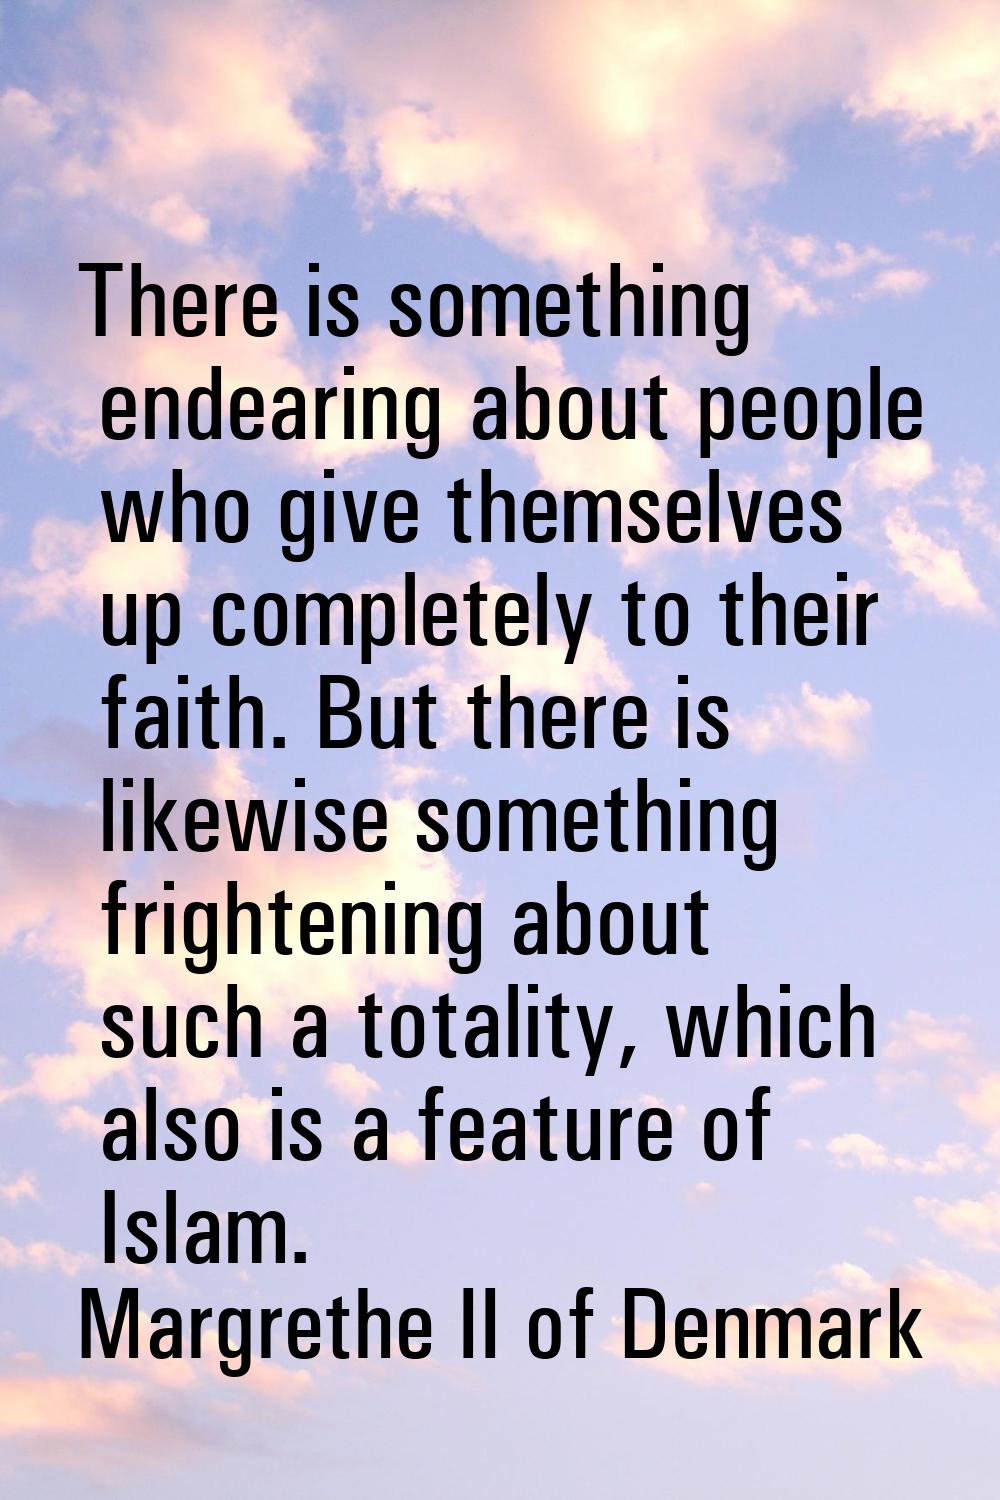 There is something endearing about people who give themselves up completely to their faith. But the